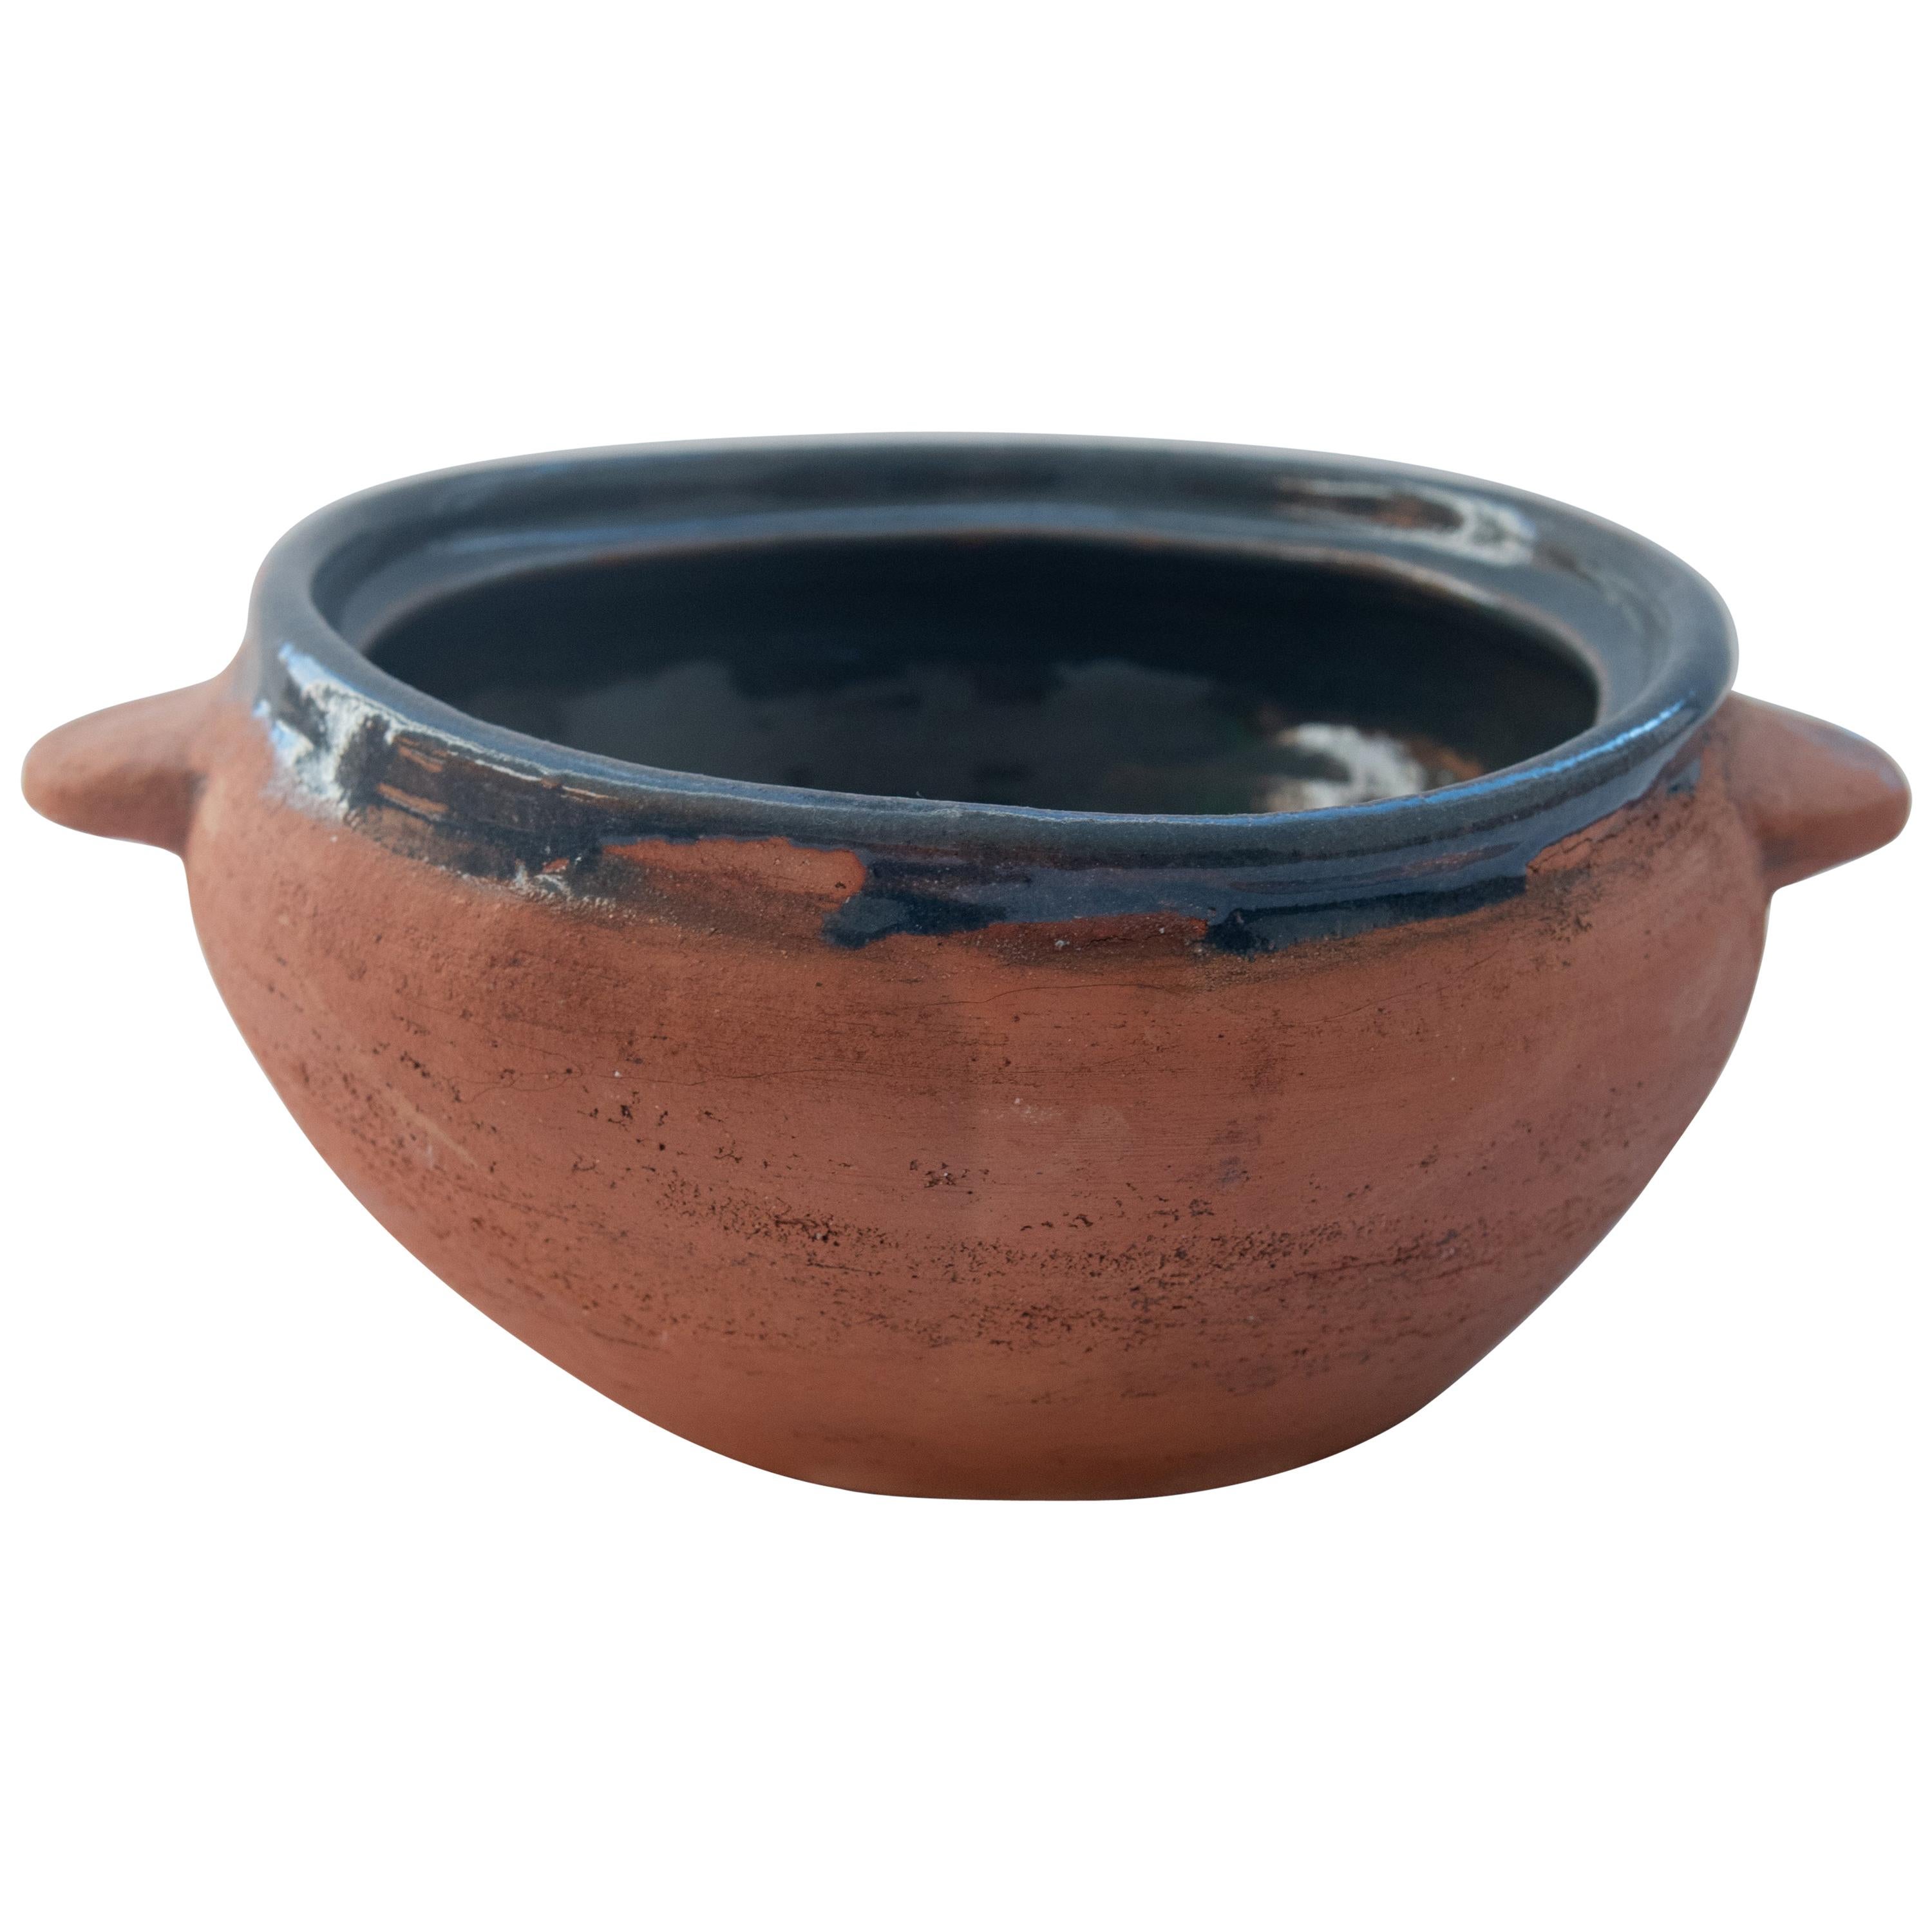 Rustic Mexican Ceramic Fruit Bowl made in Oaxaca Lead Free Blue Cover